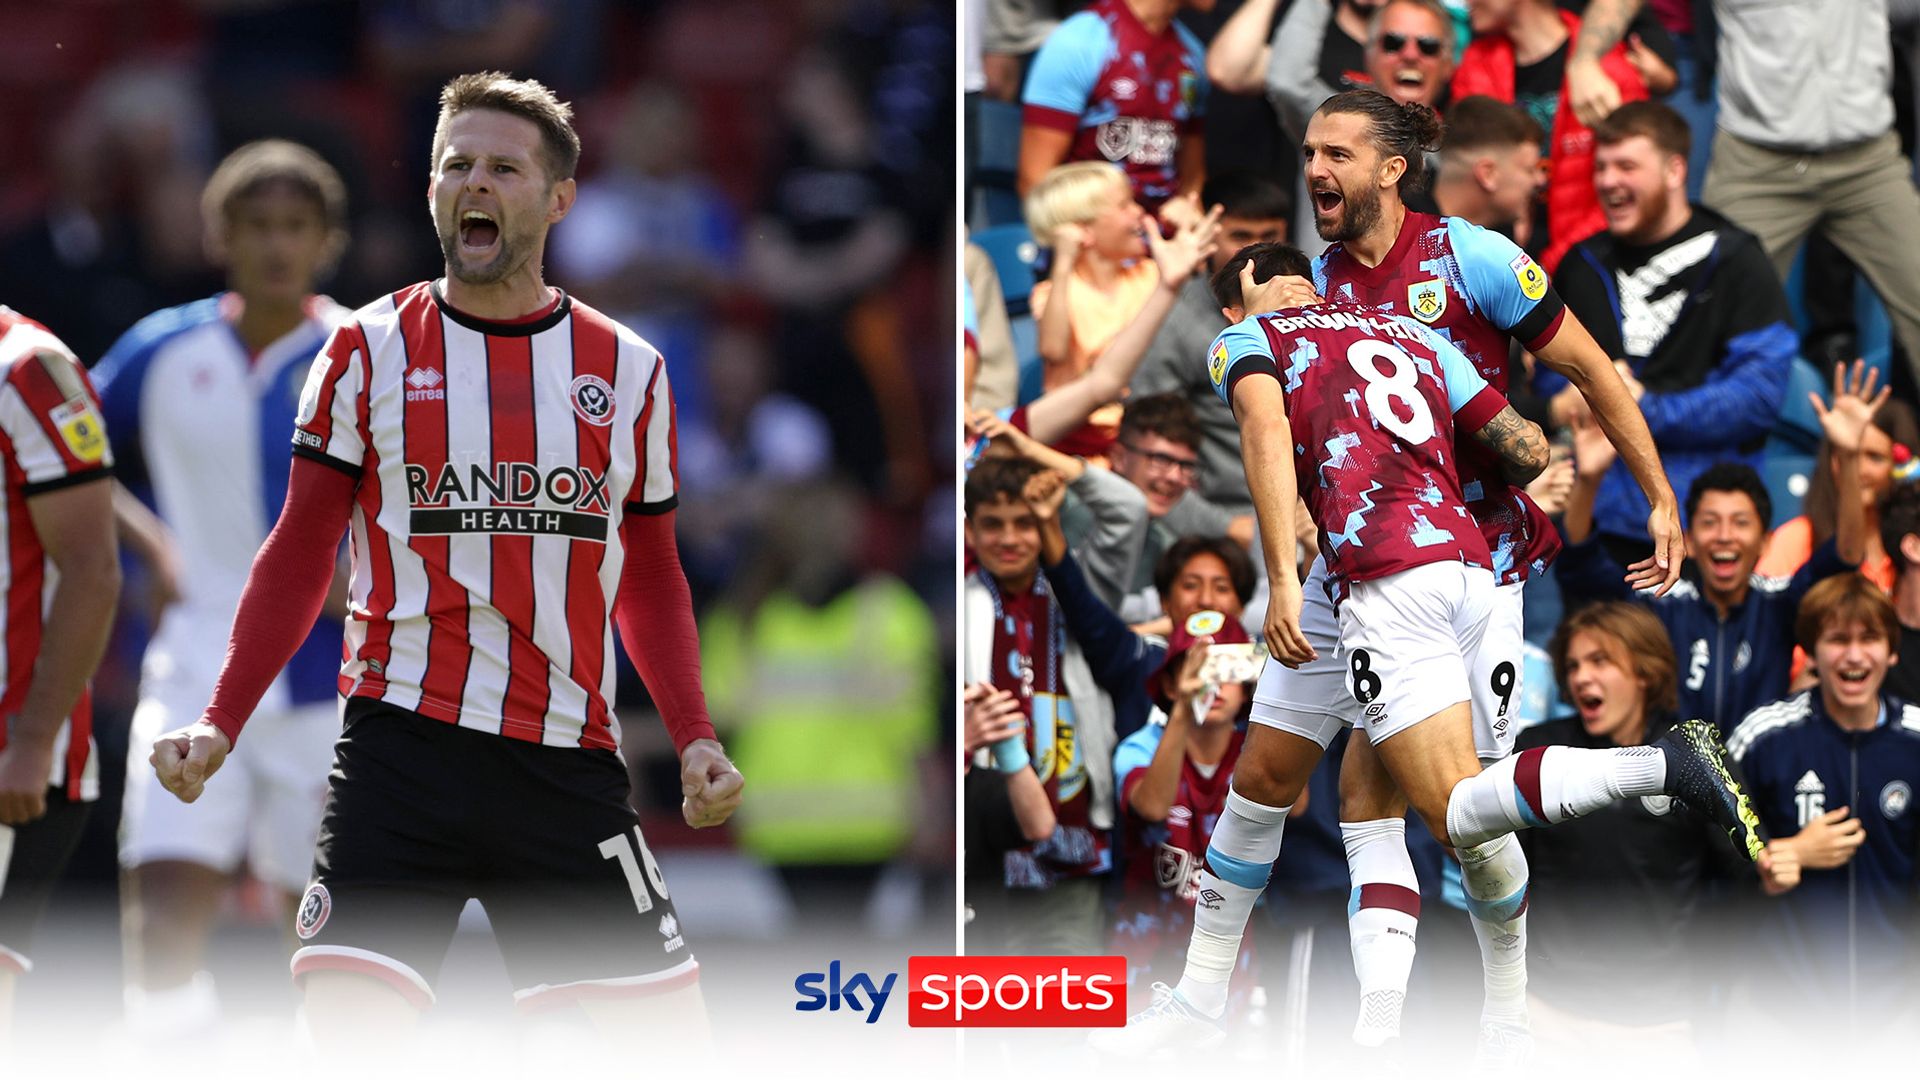 Championship on Sky: Ten new games added in March